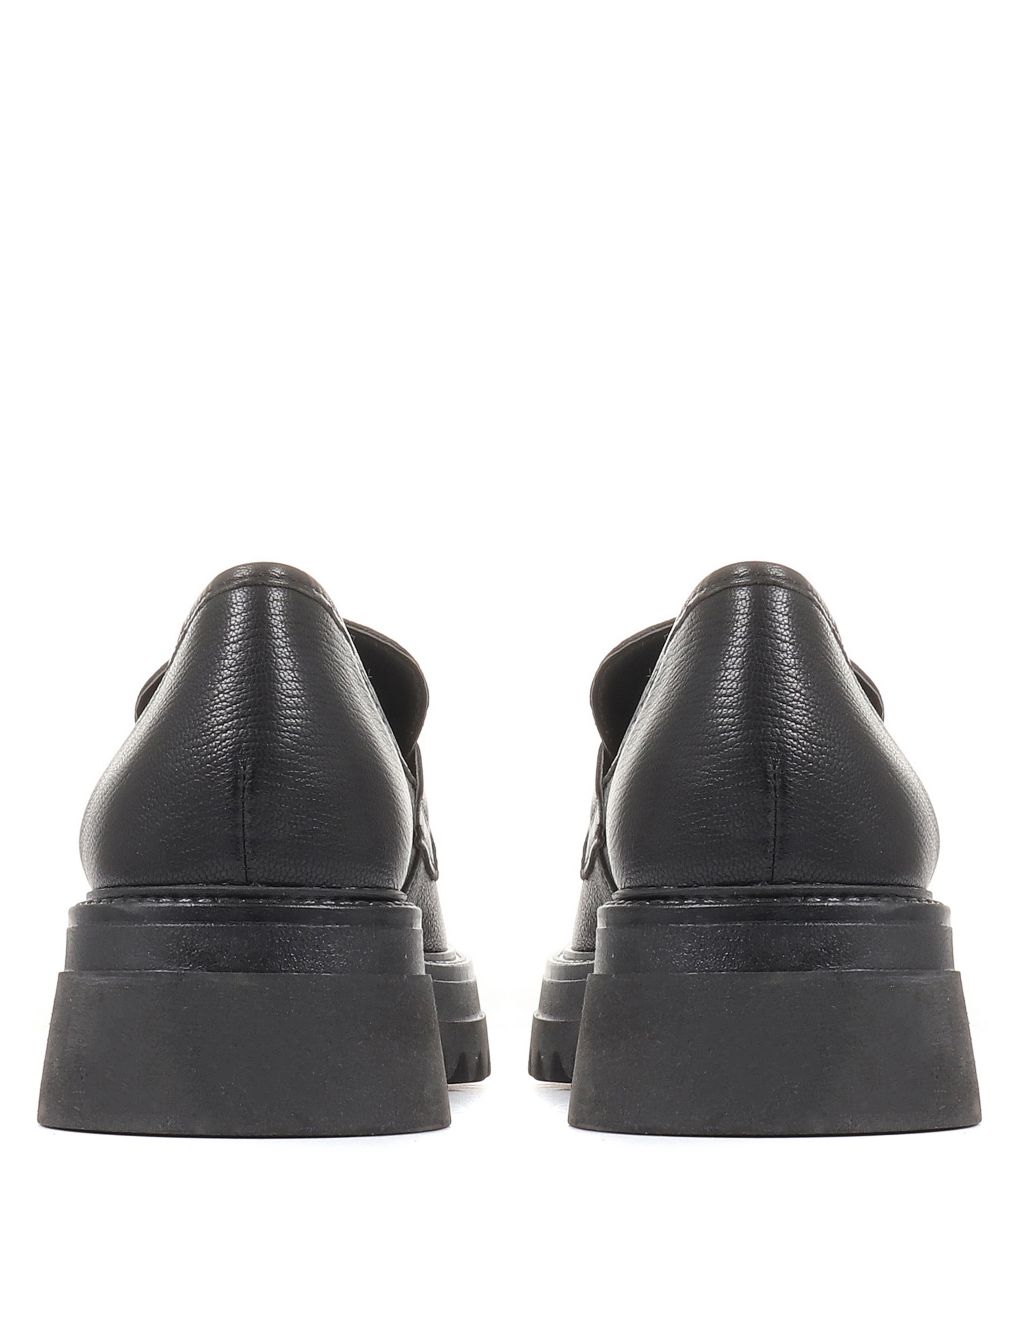 Leather Flat Loafers image 3